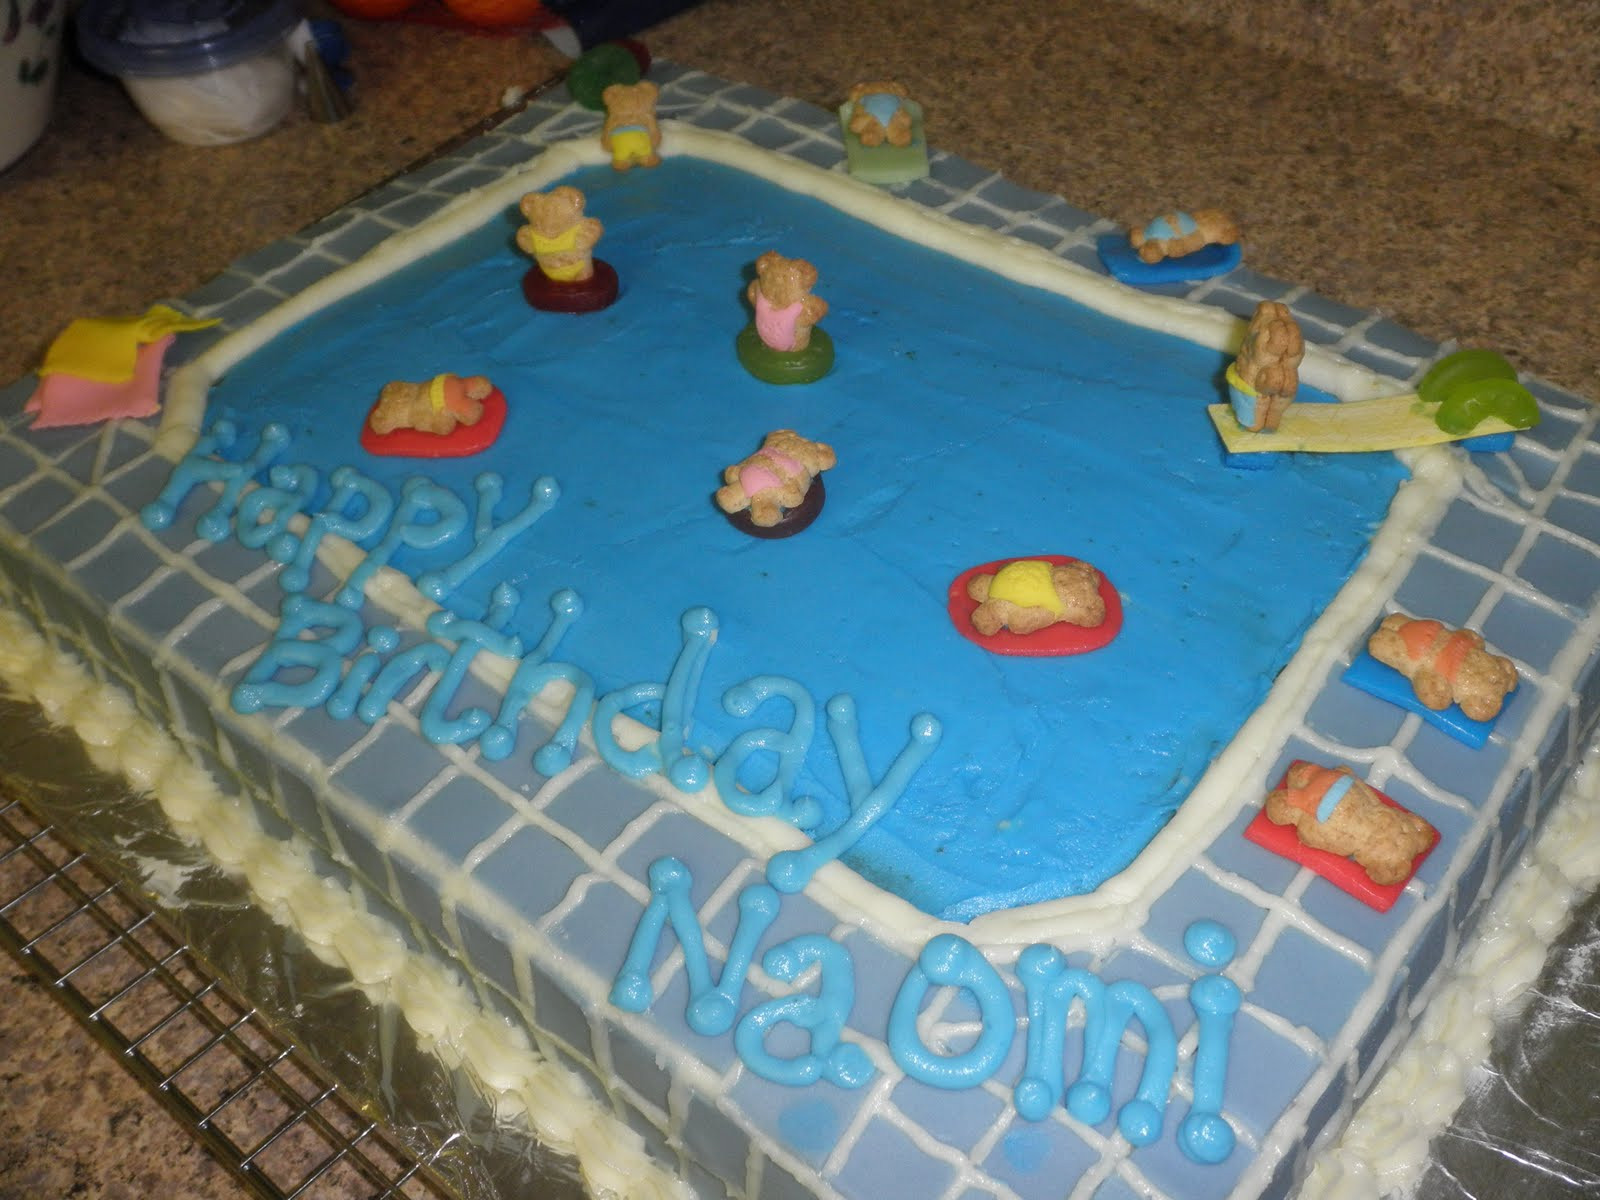 Pool Party Birthday Cakes
 Cakes By D Pool Party Birthday Cake